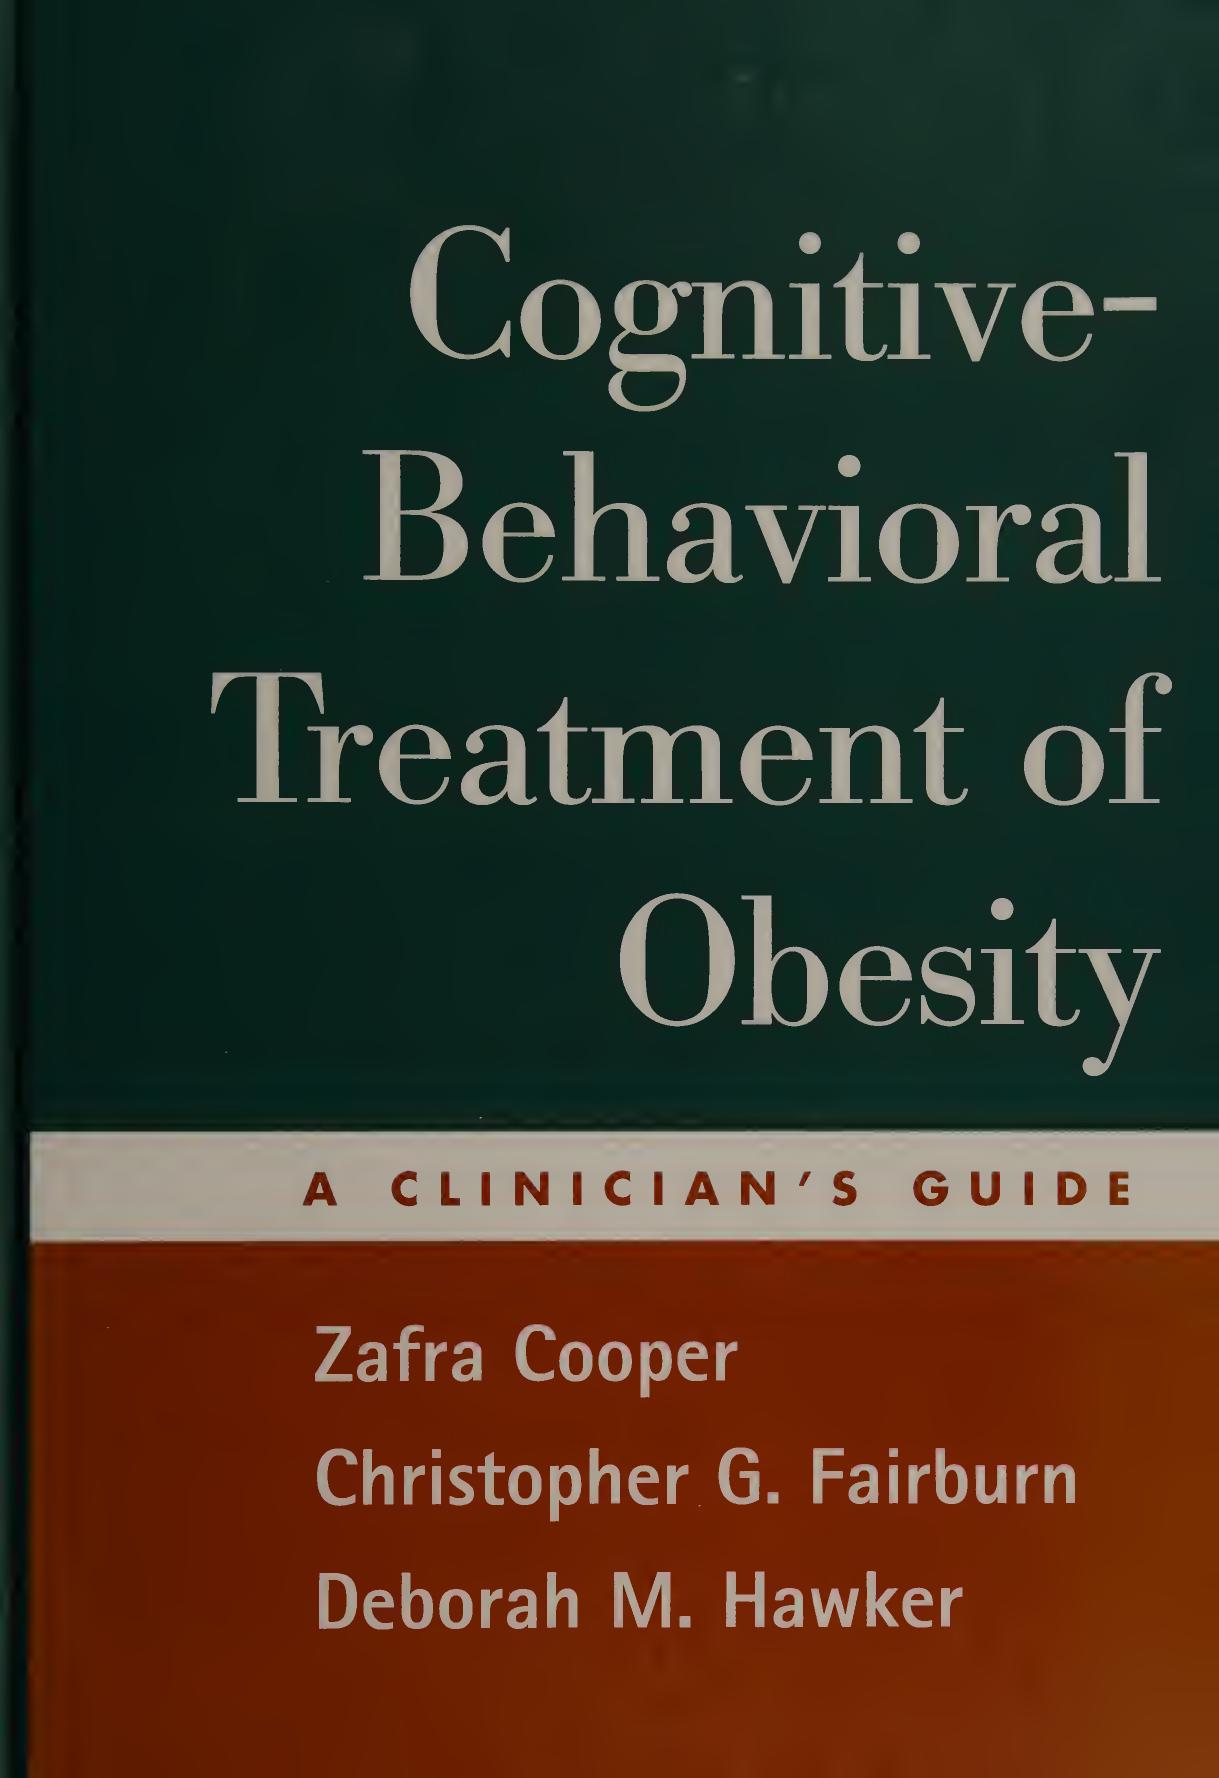 Cognitive-Behavioral Treatment of Obesity: A Clinician's Guide by Zafra Cooper Christopher G. Fairburn Deborah M. Hawker